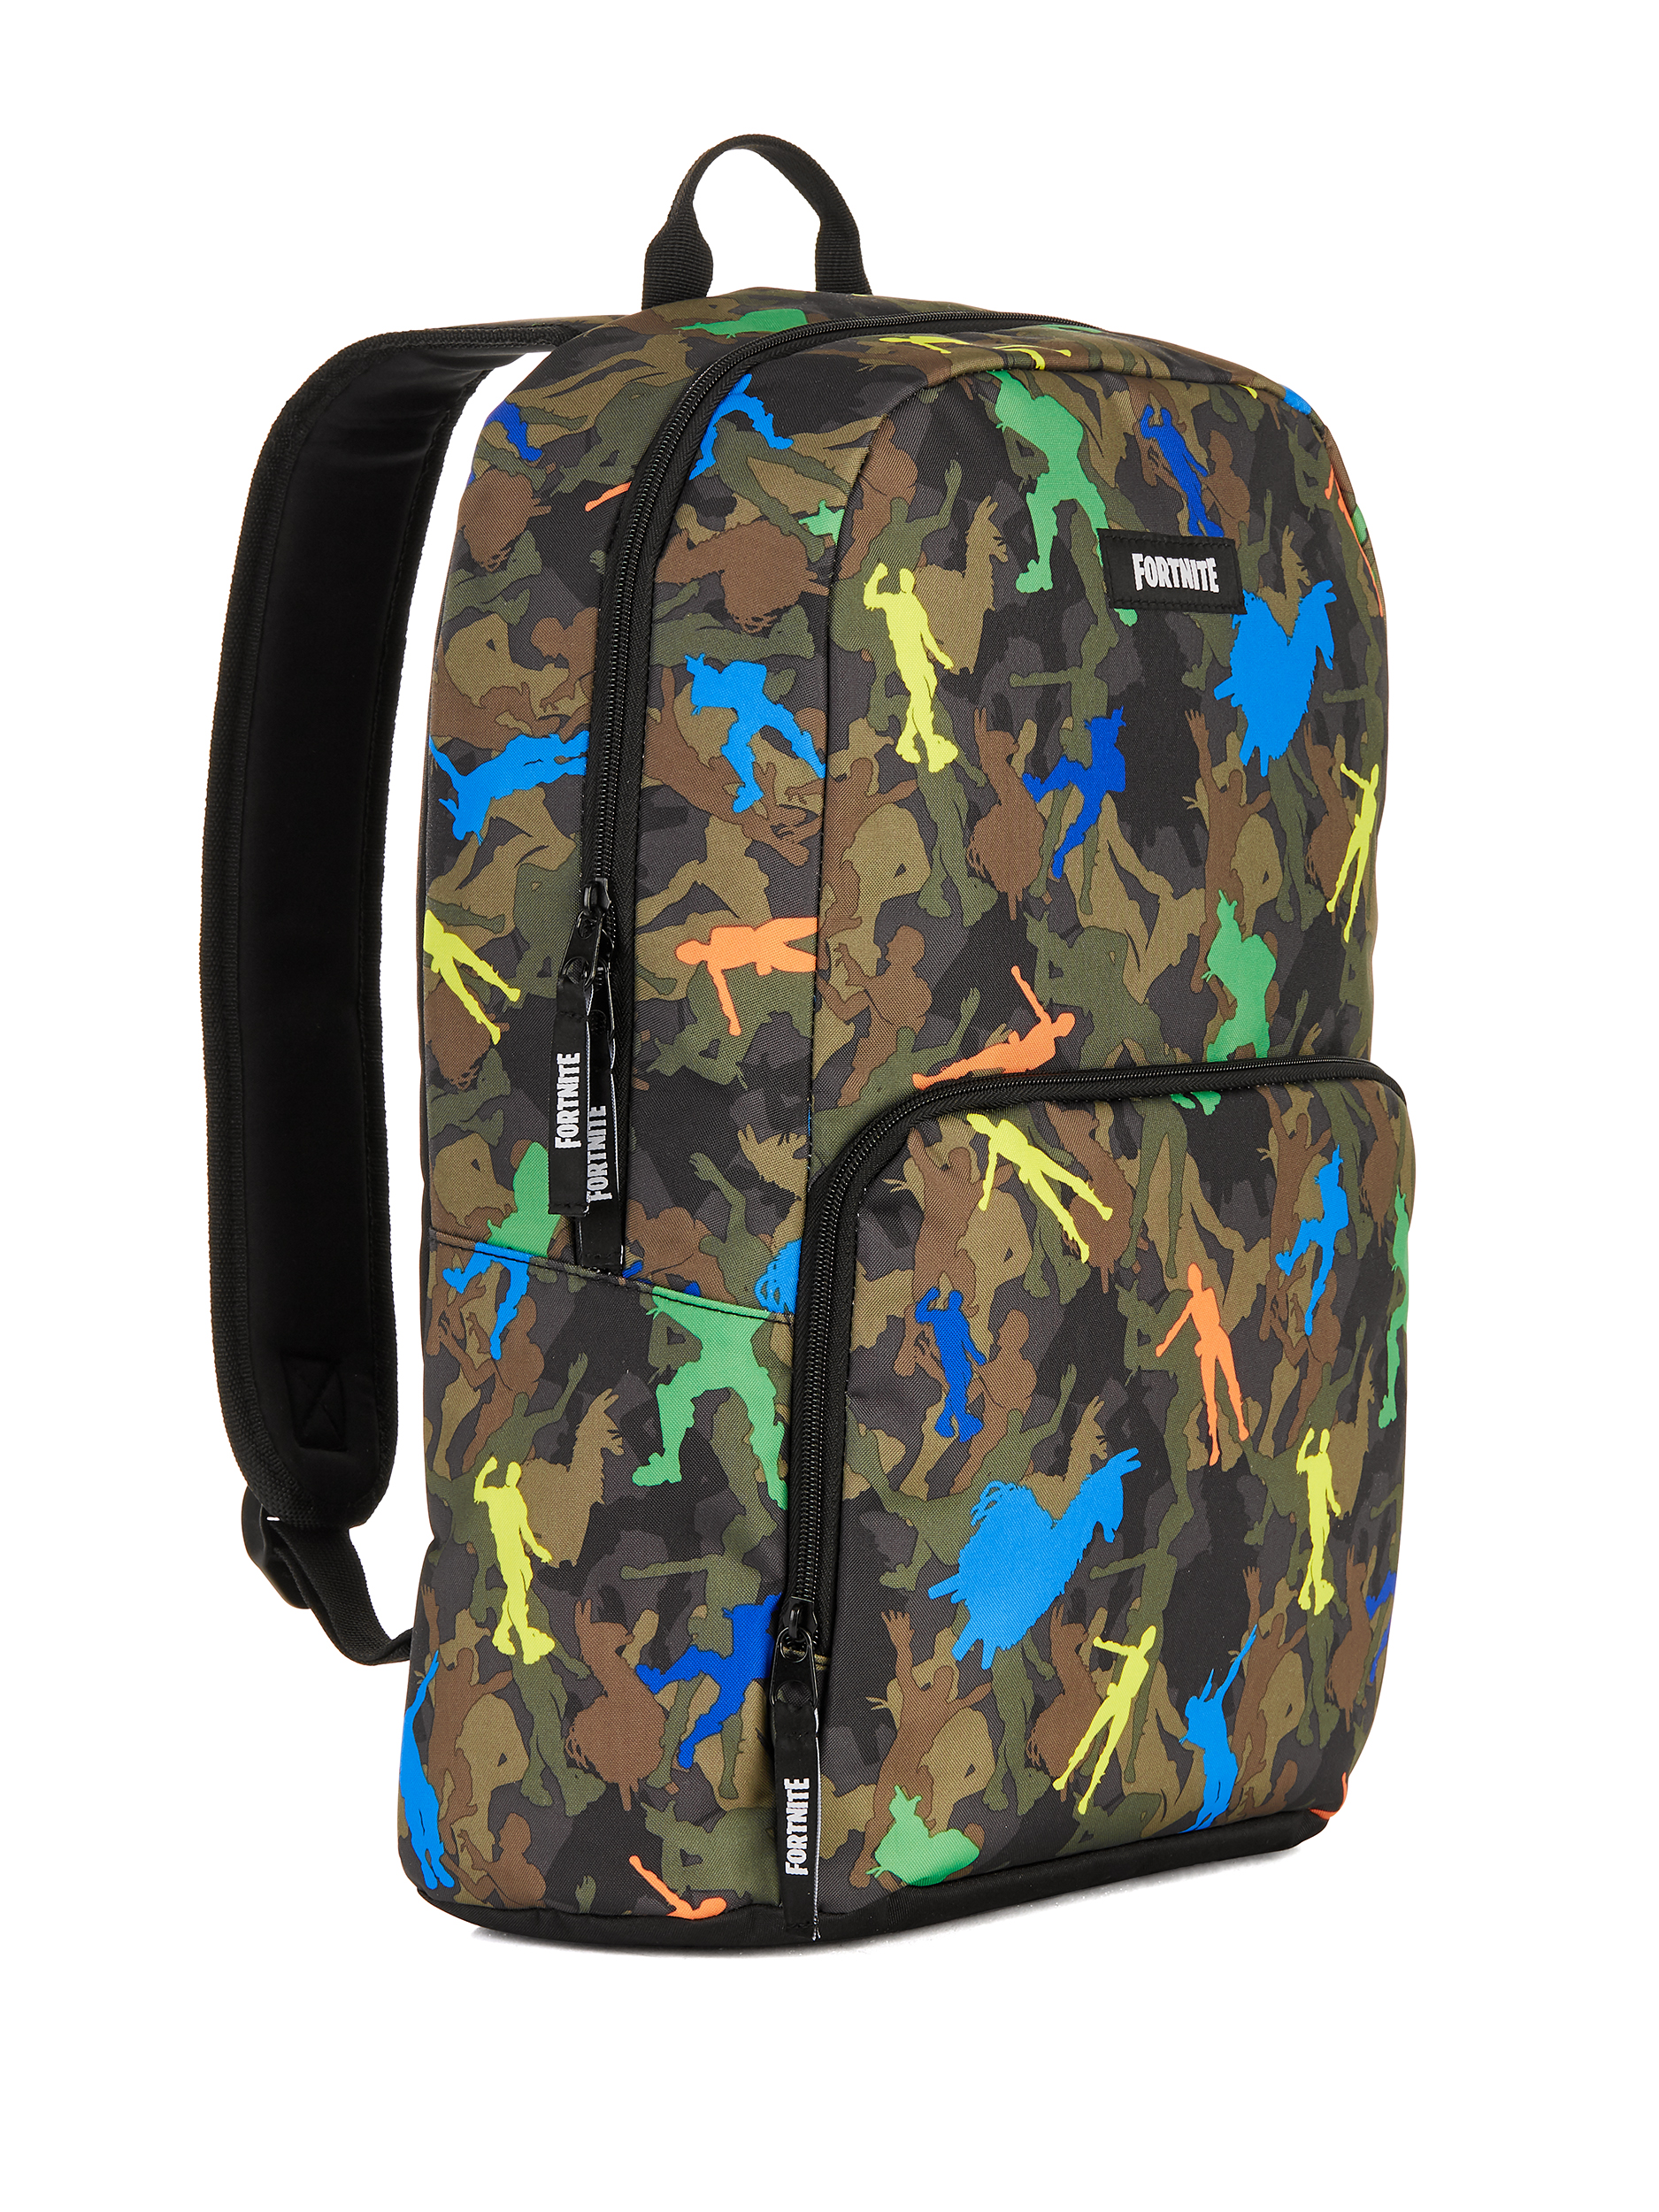 Fortnite Amplify Camo Dancing Silhouette Backpack - image 3 of 4